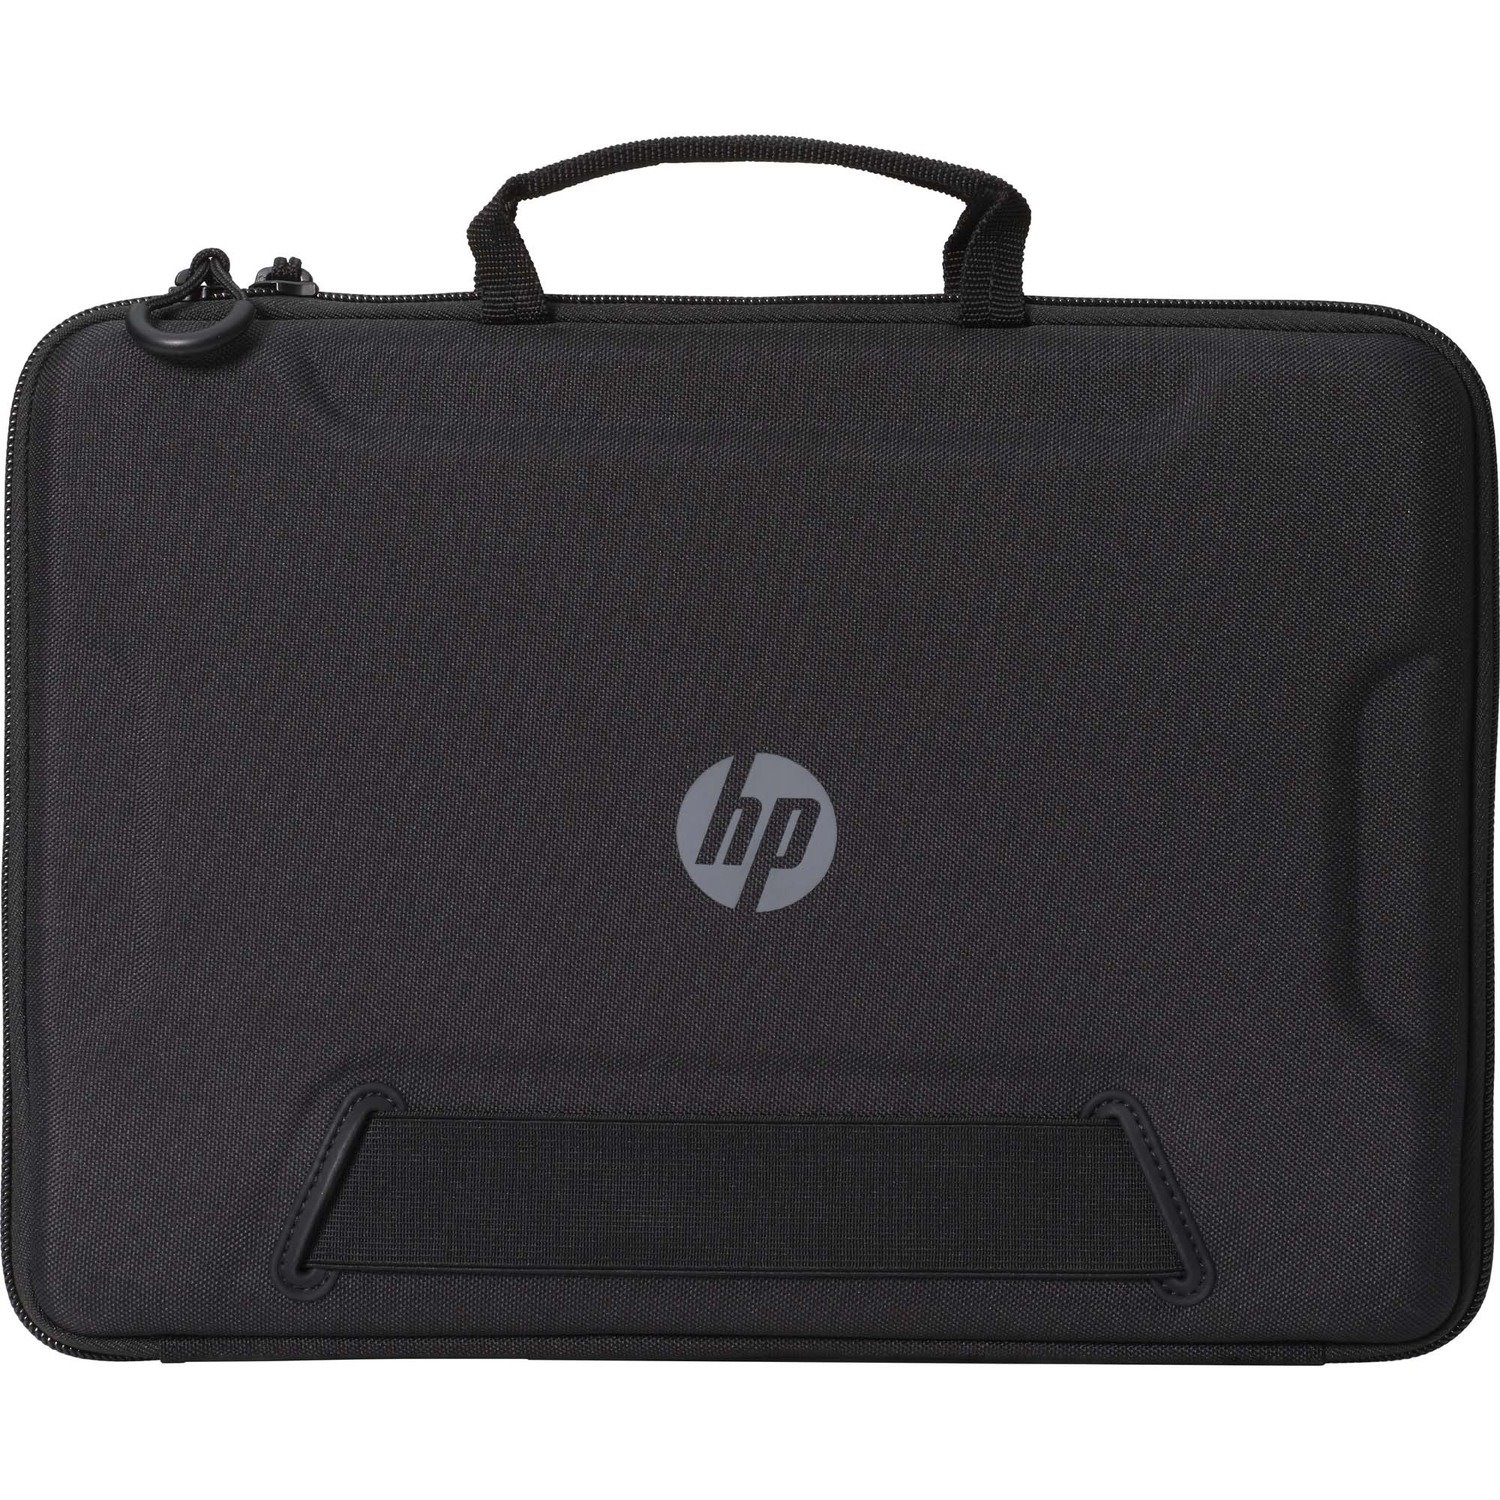 HP Carrying Case for 29.5 cm (11.6") HP Notebook, Chromebook - Black